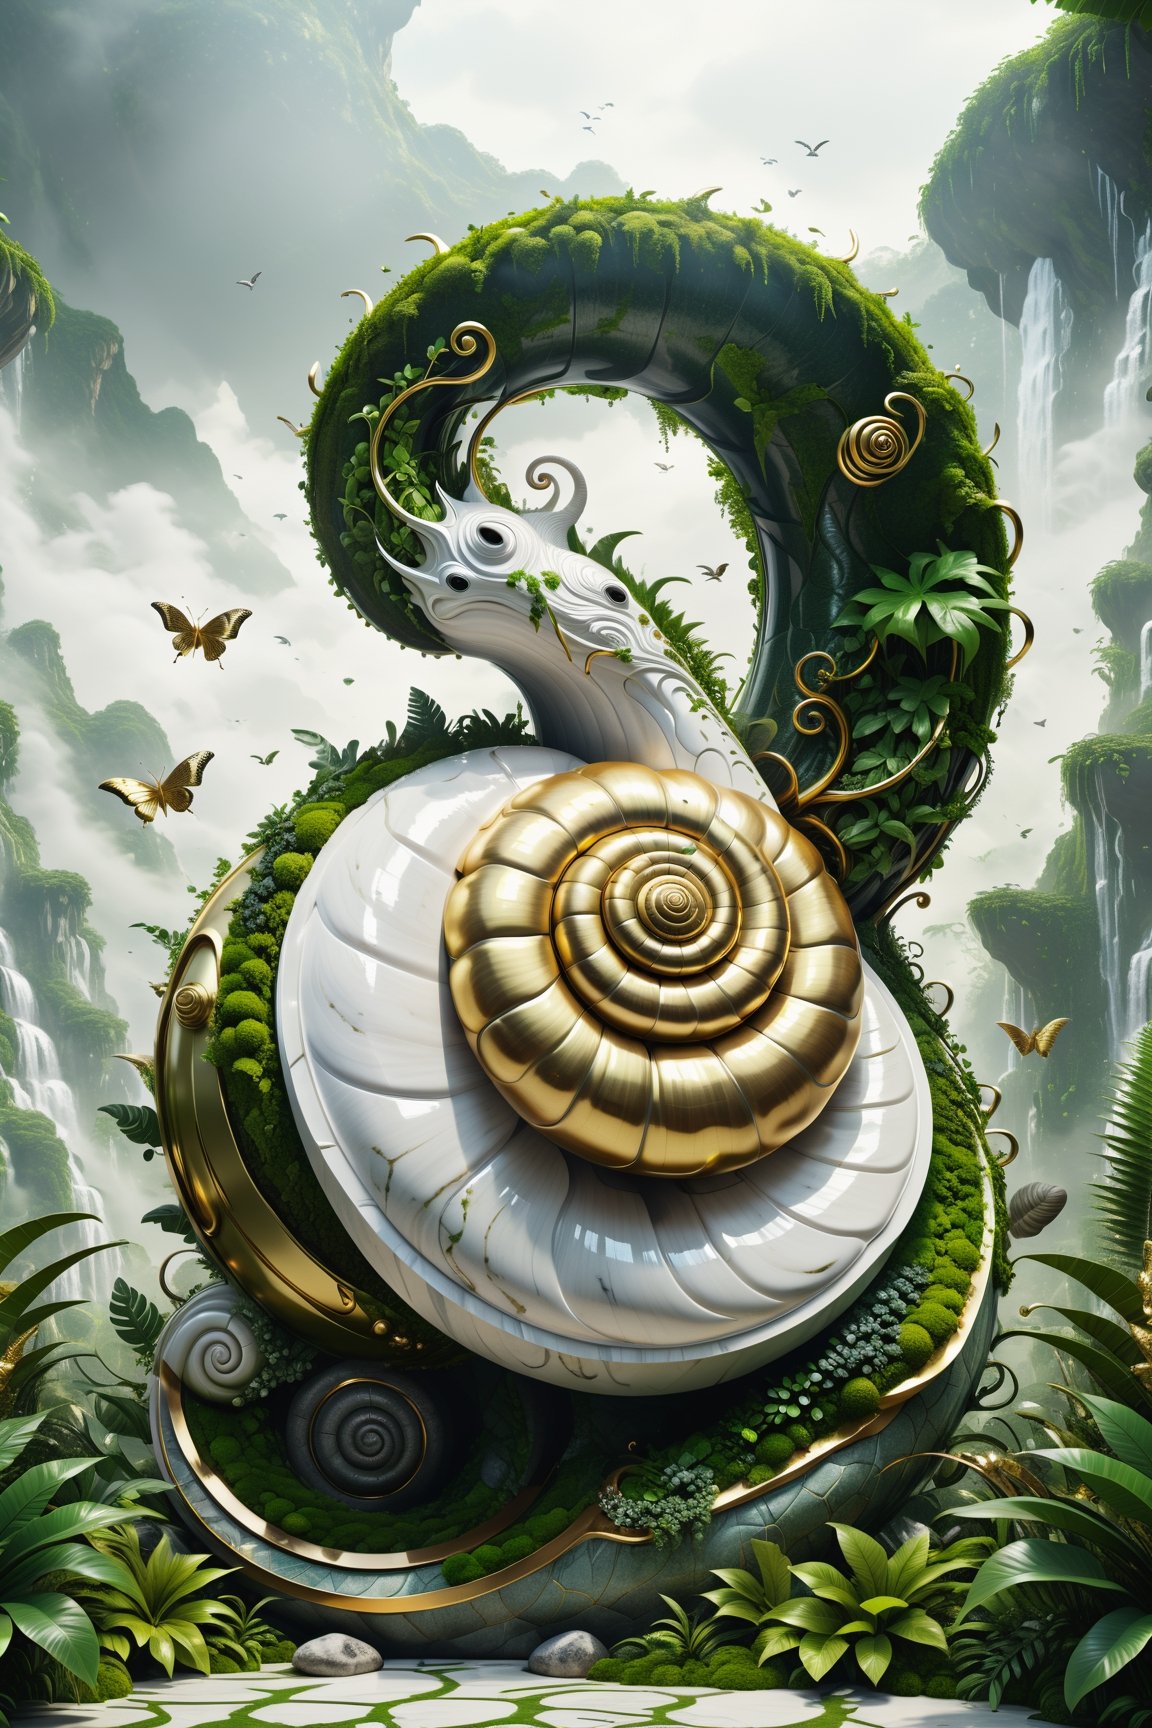 High definition photorealistic render of an incredible and mysterious futuristic mythical creating creature inusual big with giant snail with wings snake in splosion monster with parametric shape and structure in the word, curved and fluid shapes in a thick jungle full of a lot of vegetation and trees with vines and rocks with moss, in white marble with intricate gold details, luxurious details and parametric architectural style in marble and metal, epic pose
​